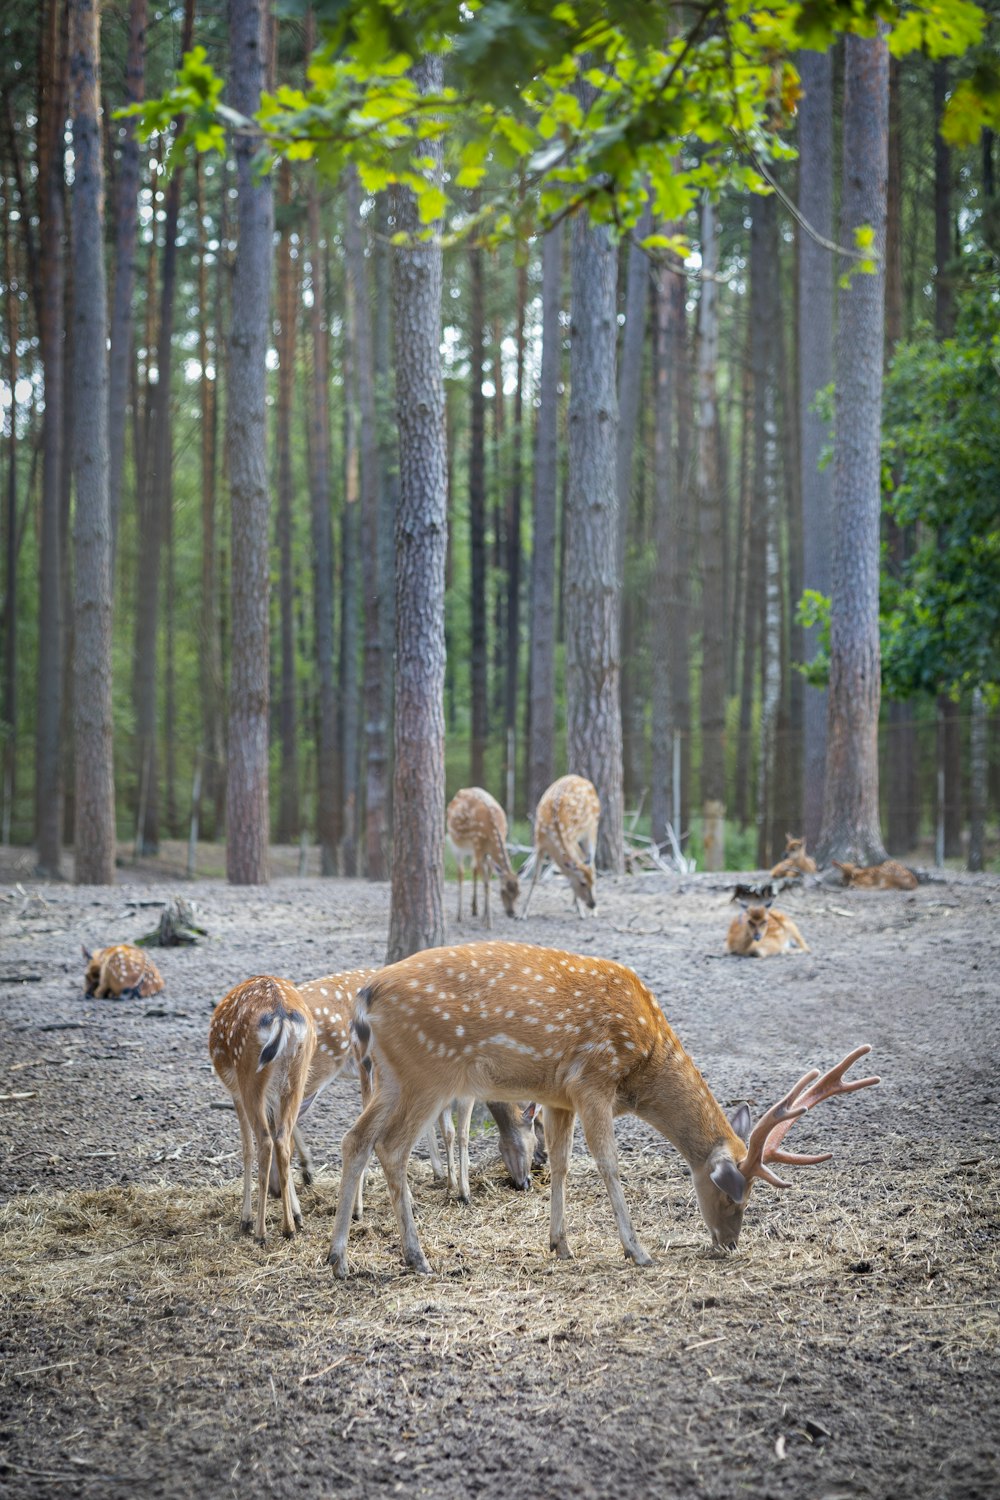 a herd of deer grazing on grass in a forest